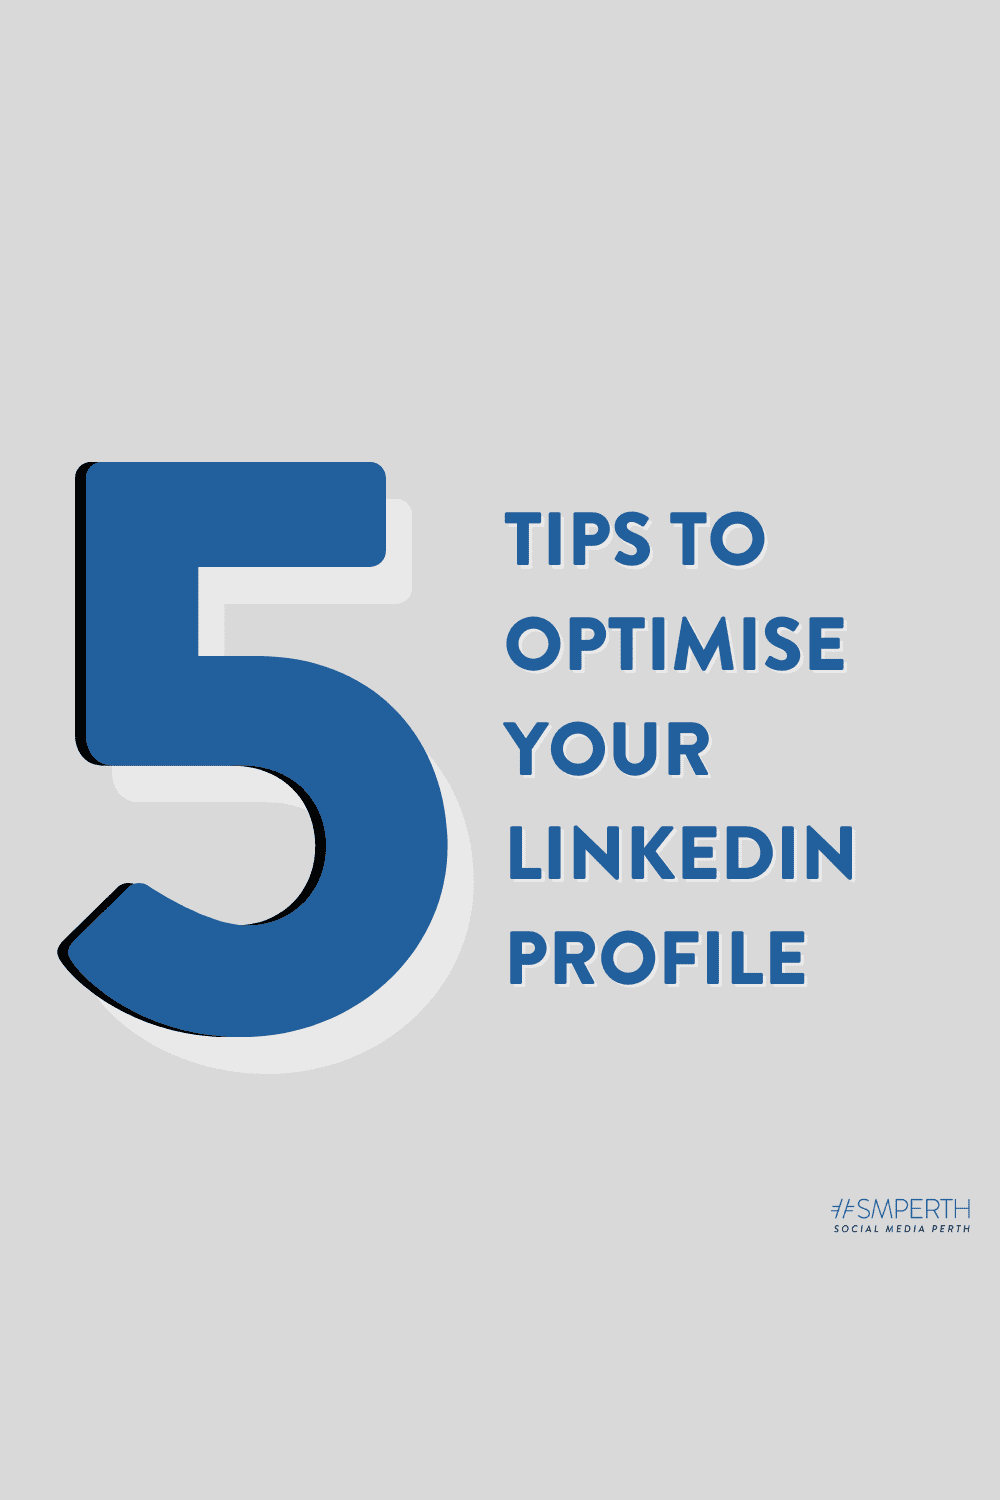 5 Tips to Optimise your LinkedIn Profile